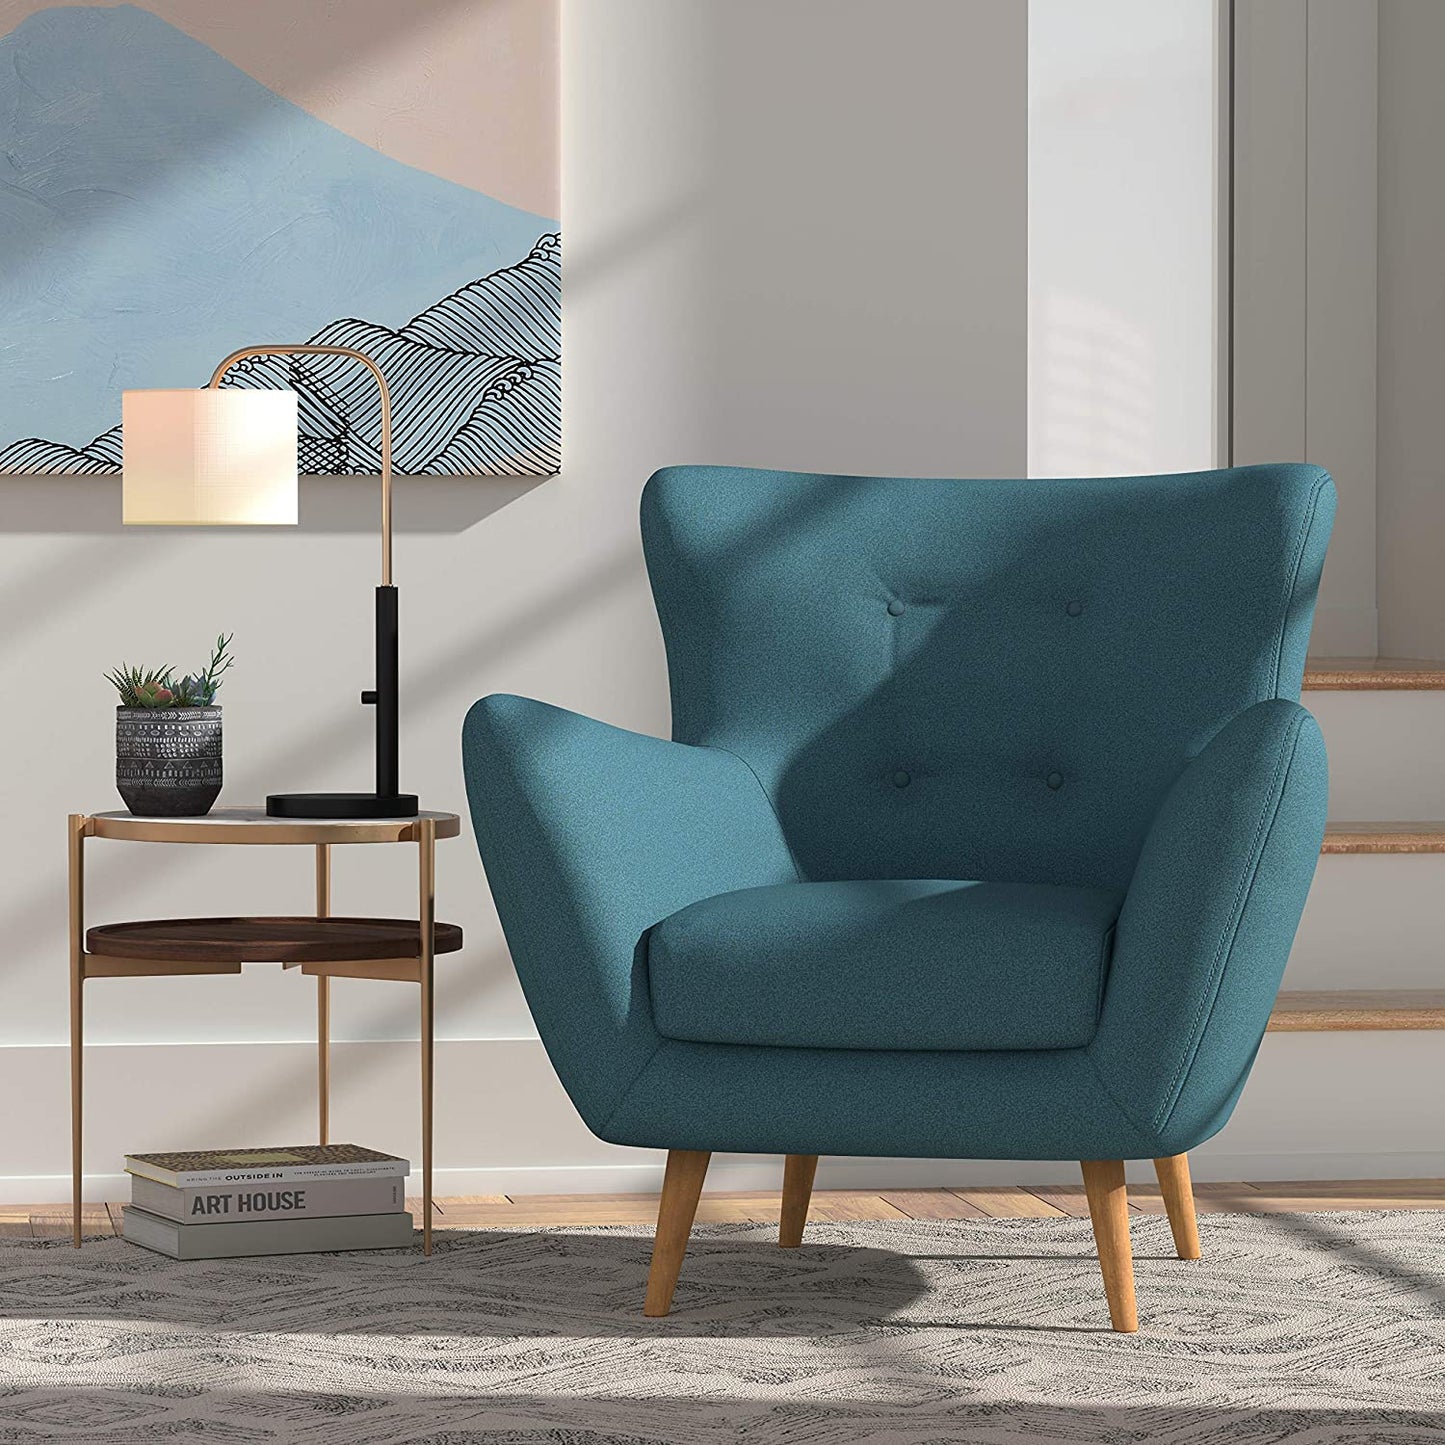 Sofa Chair : Aqua Living Room Arm Chair with Tapered Wood